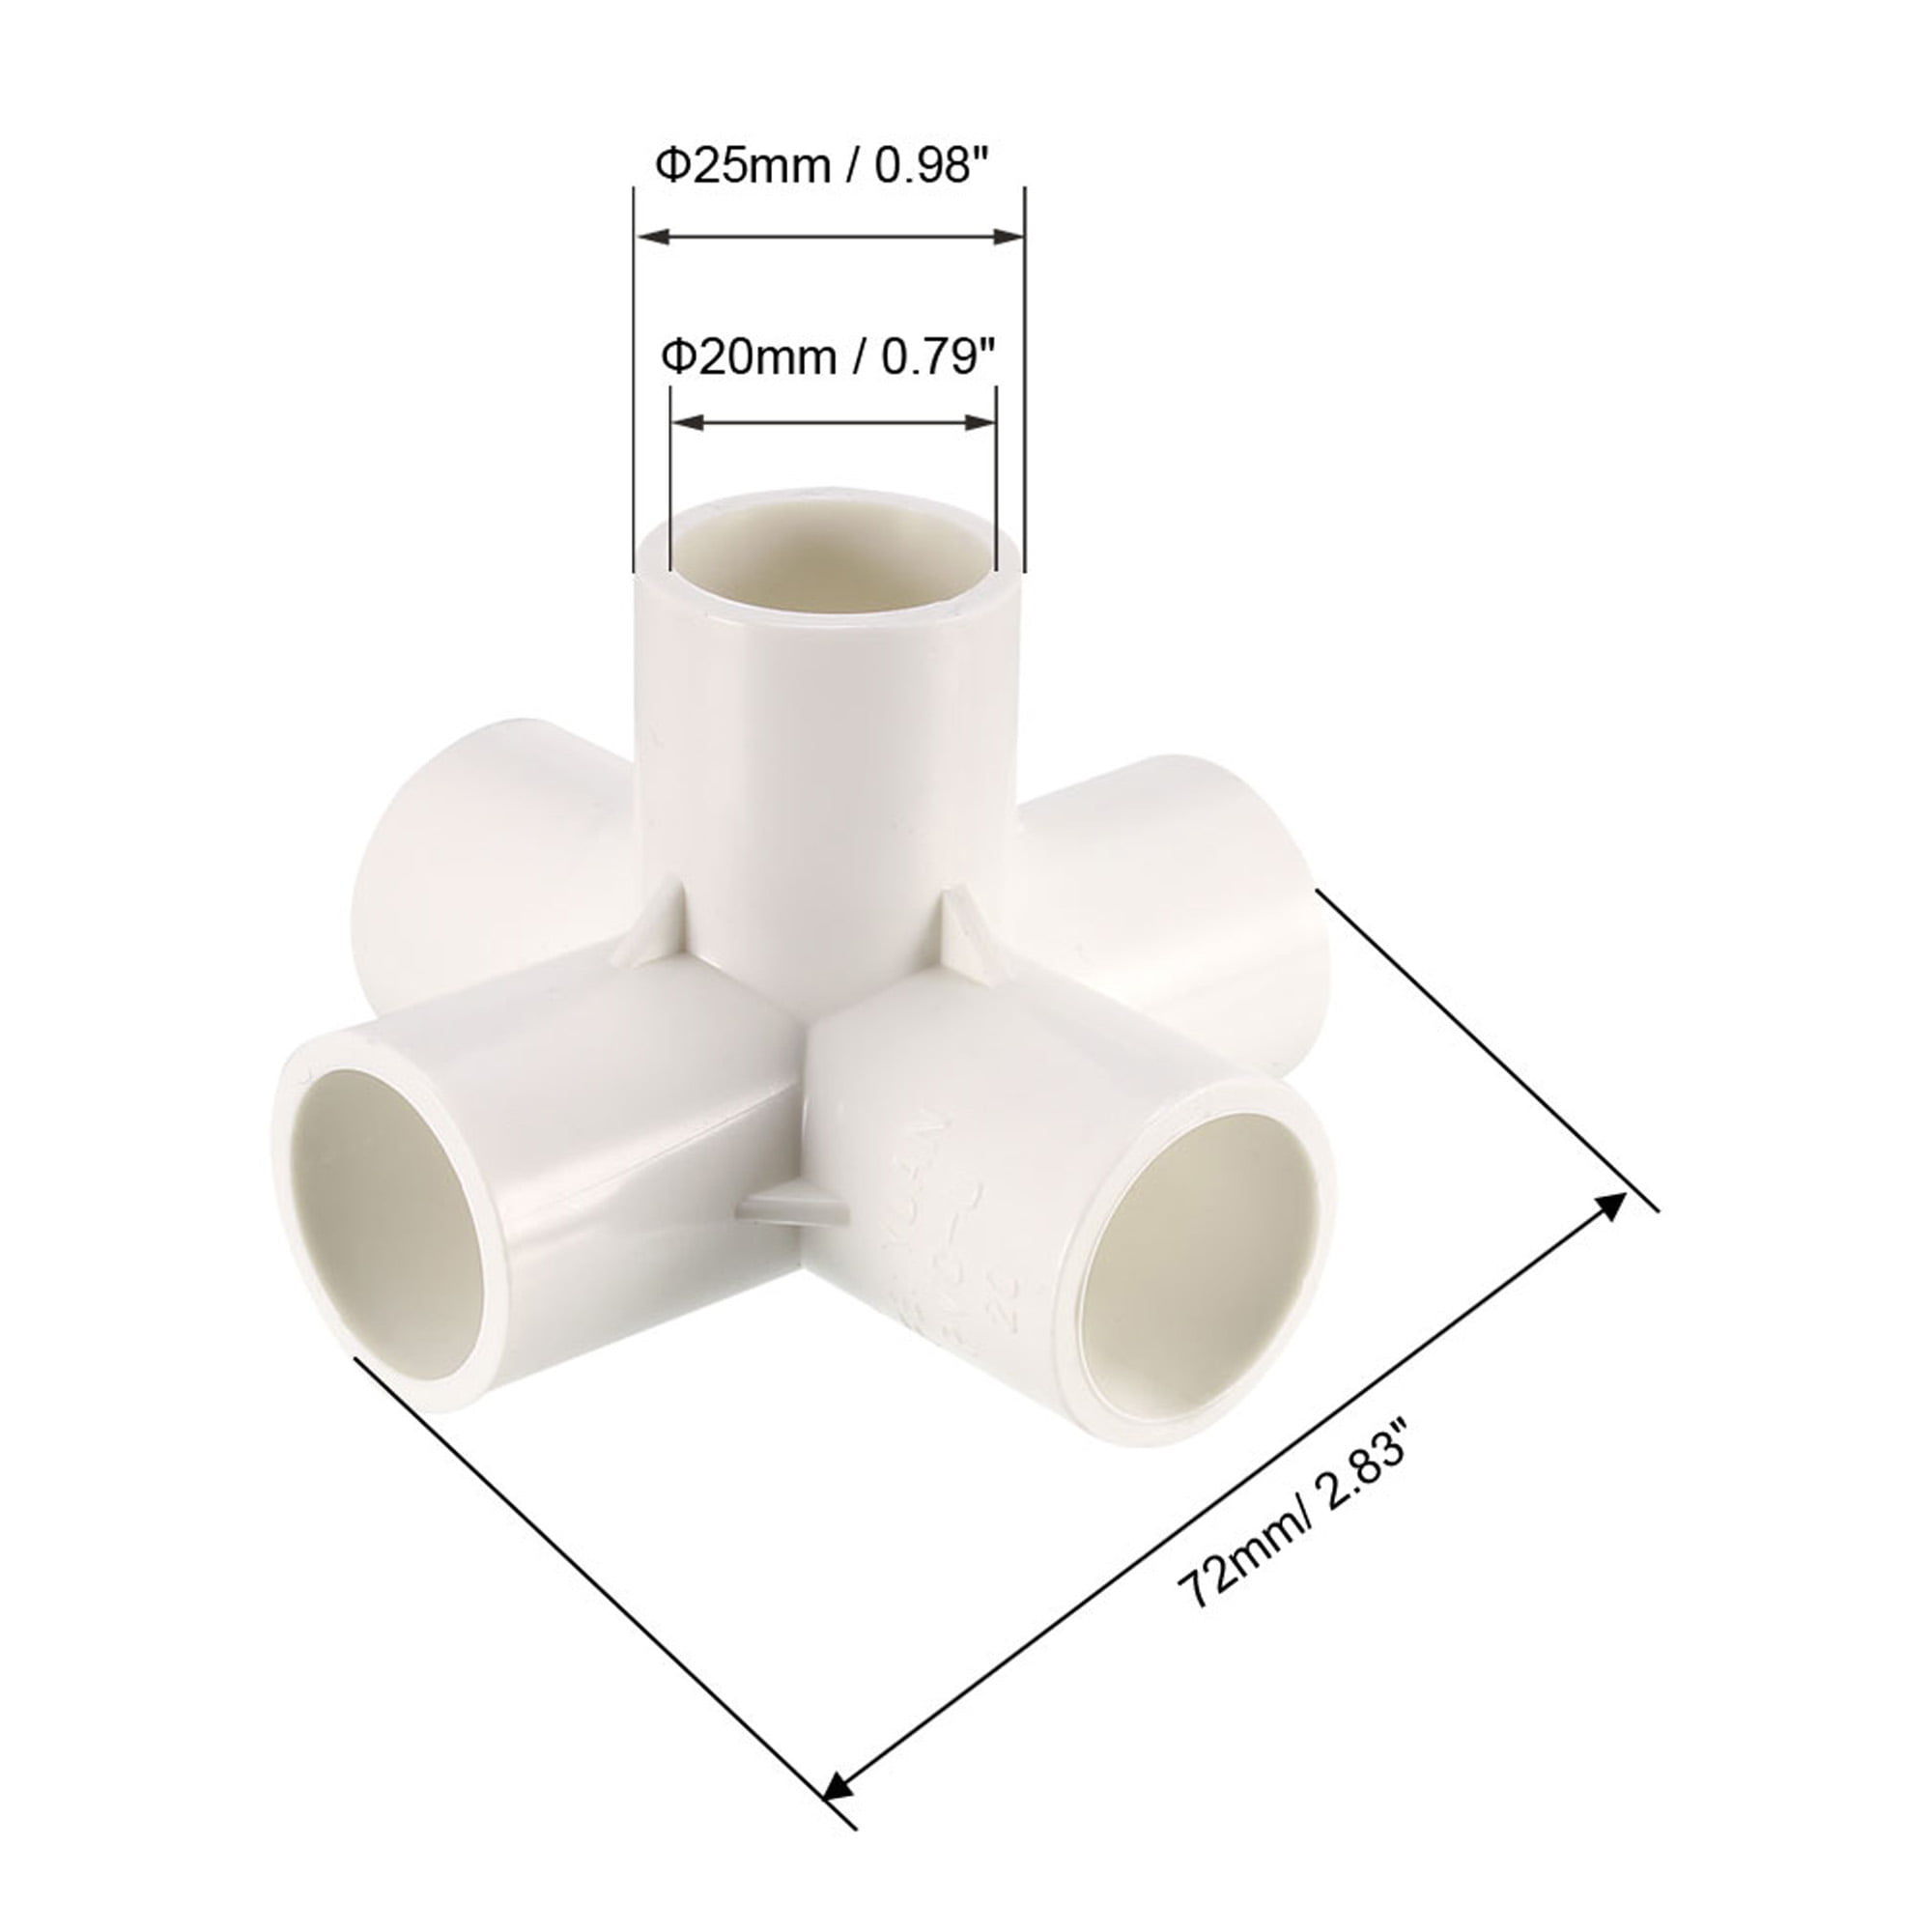 for Building Furniture and PVC Structures QWORK 5 Way 1 Tee PVC Fitting Elbow,10 Pack PVC Fitting Connector White Furniture Grade 